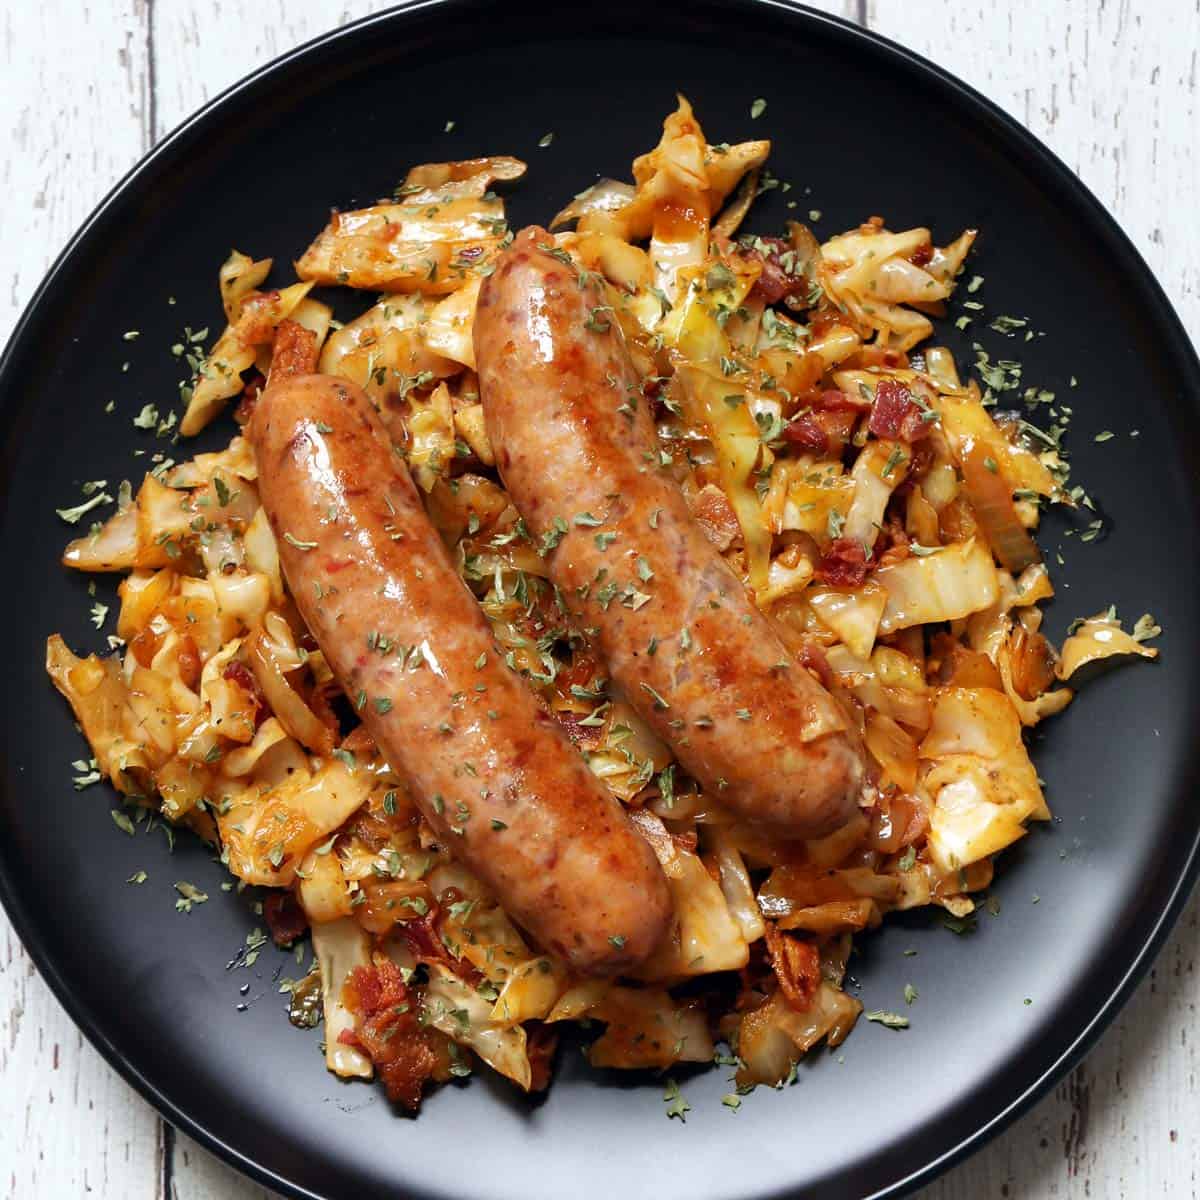 Fried cabbage is served with sausage links.